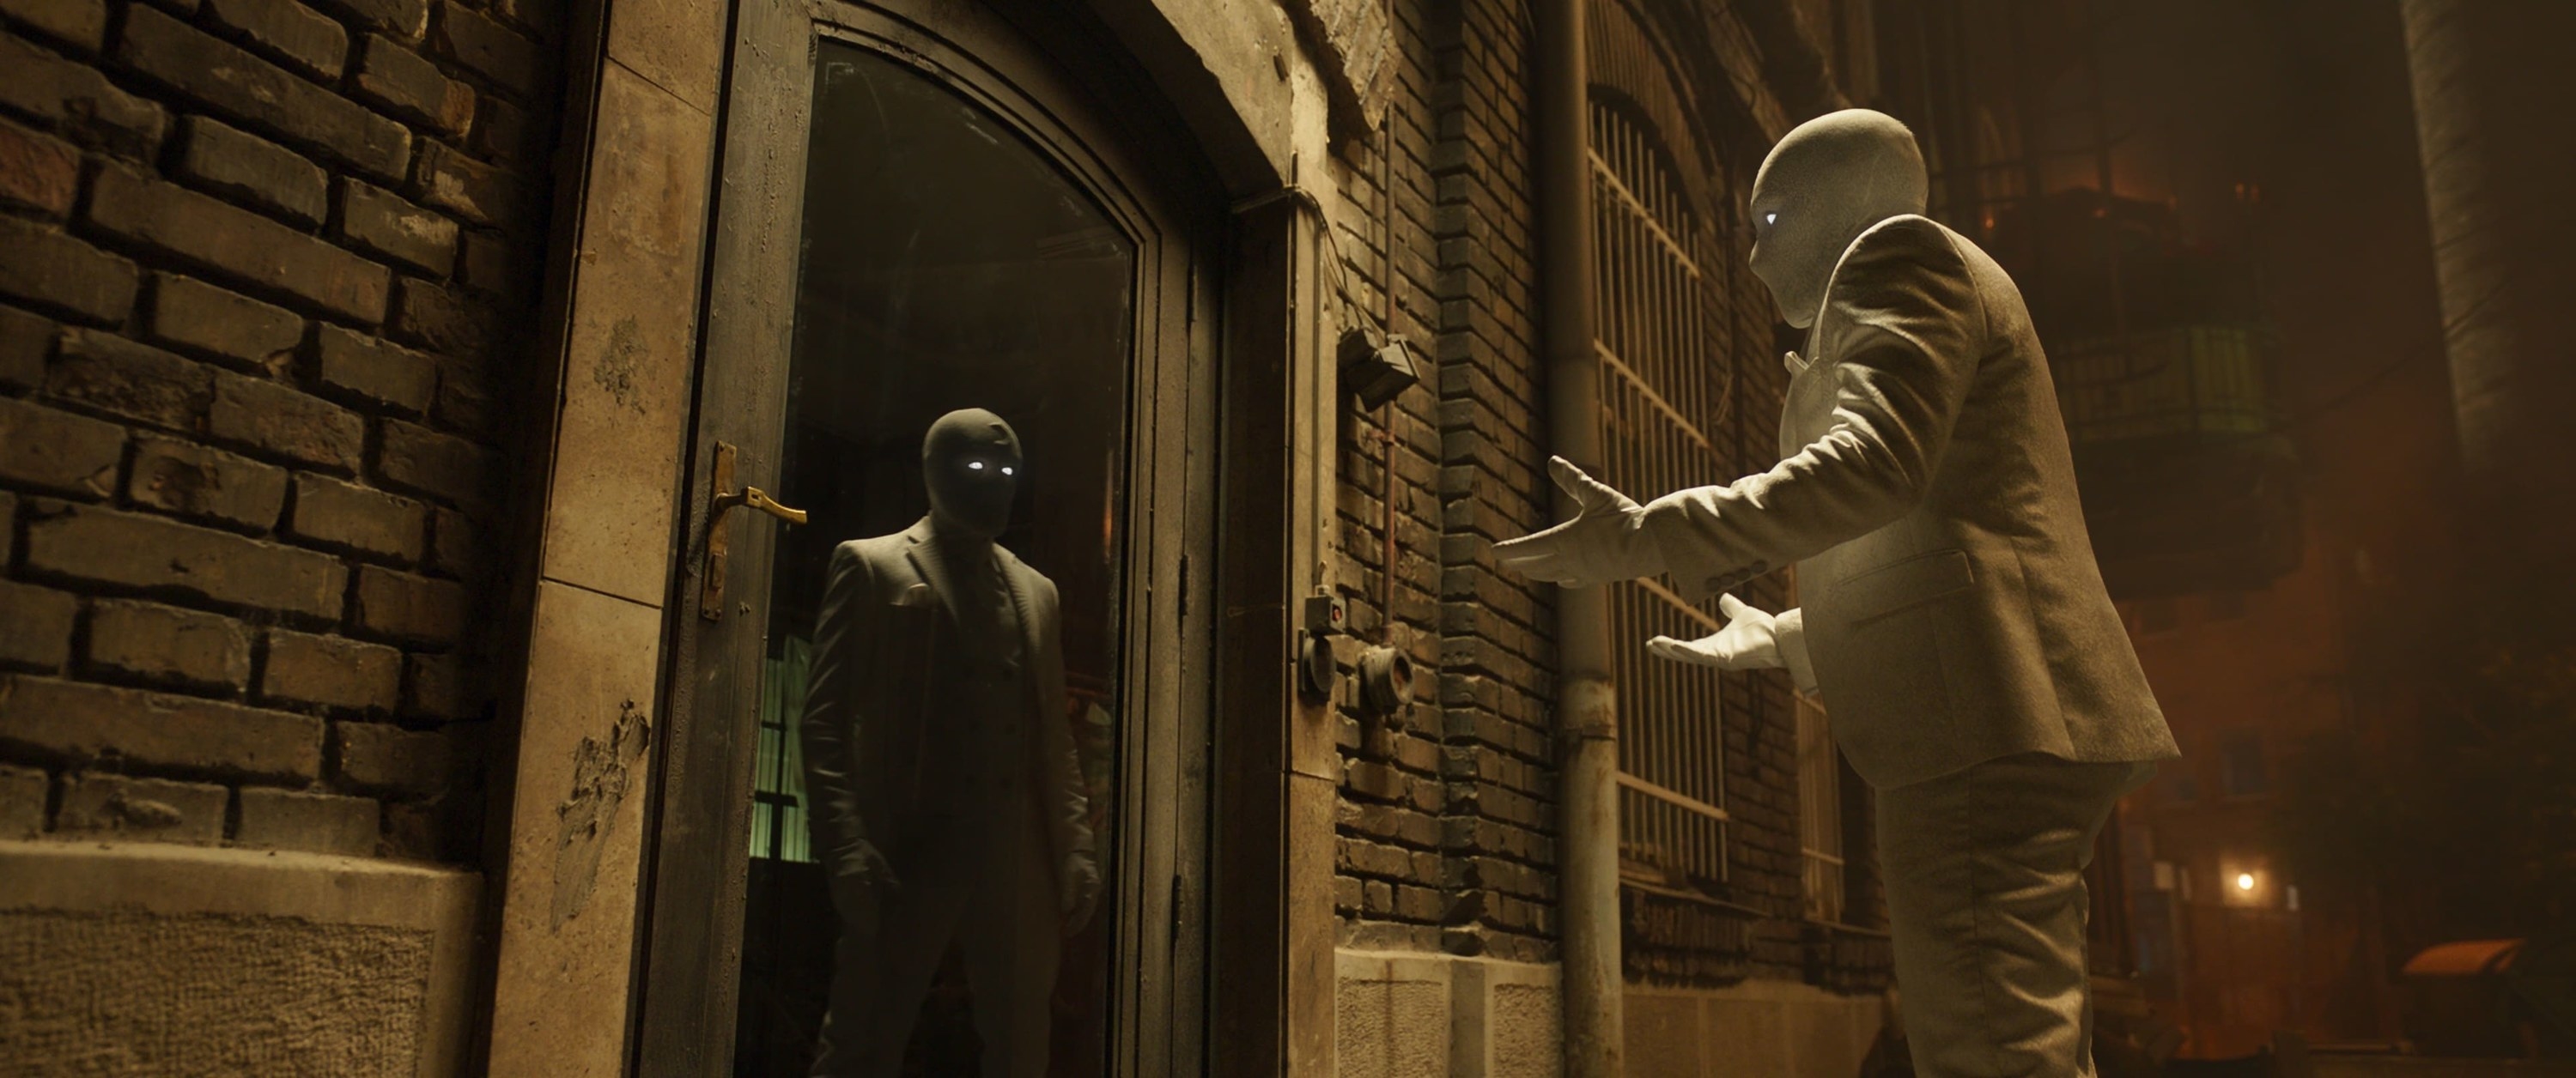 Mr Knight, dressed in a white suit with his white headgear on, gestures at himself in the reflection of a glass door. He is standing on a street, and his reflection is NOT mirroring his actions